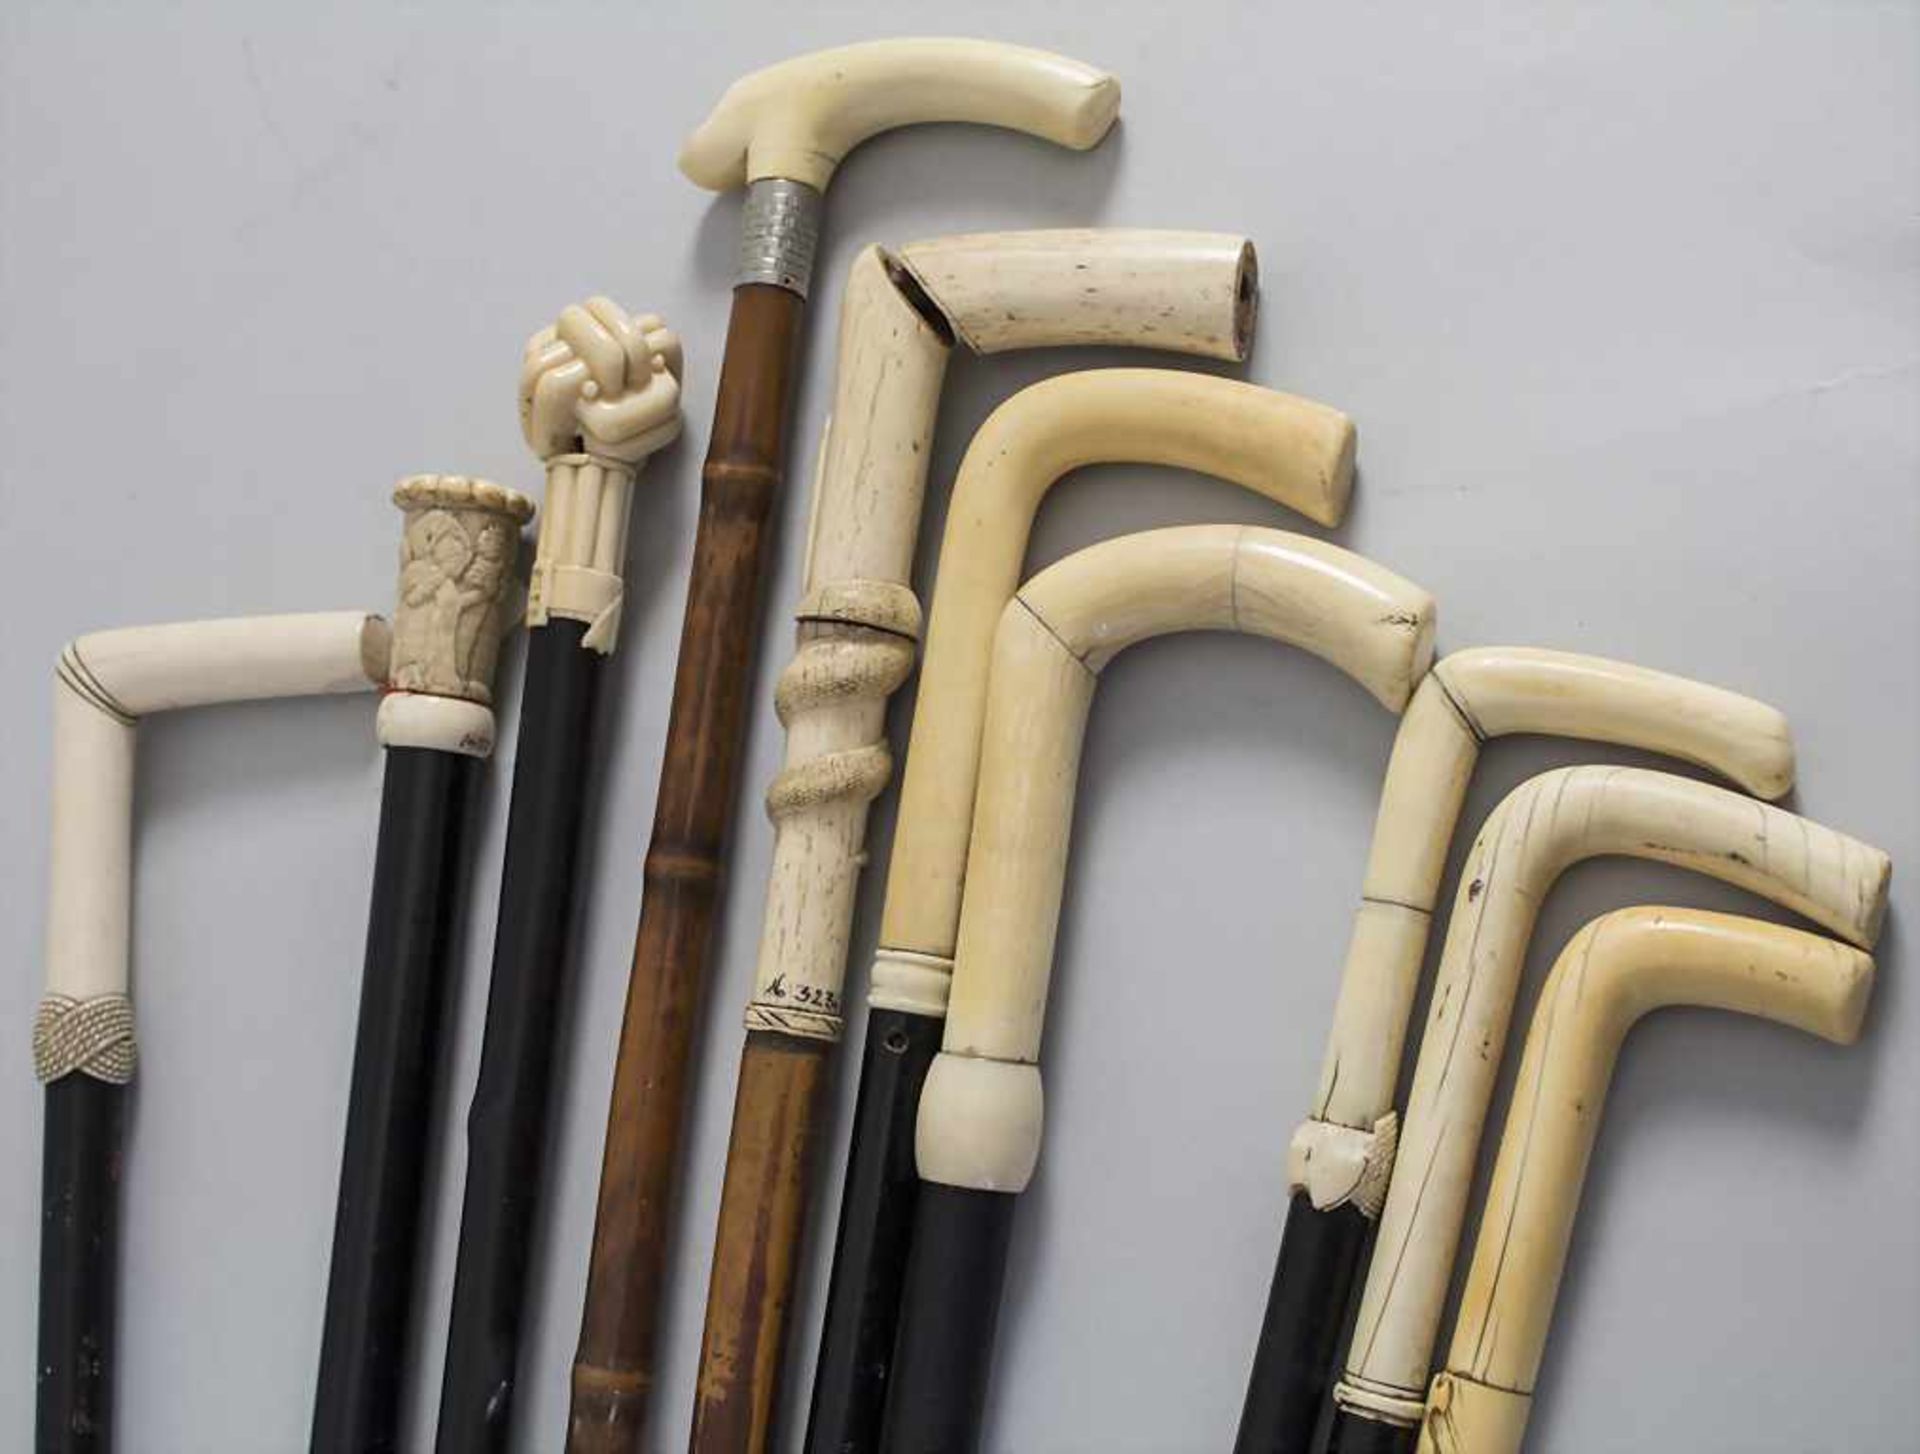 Sammlung 10 Gehstöcke / A collection of 10 canes with ivory handle